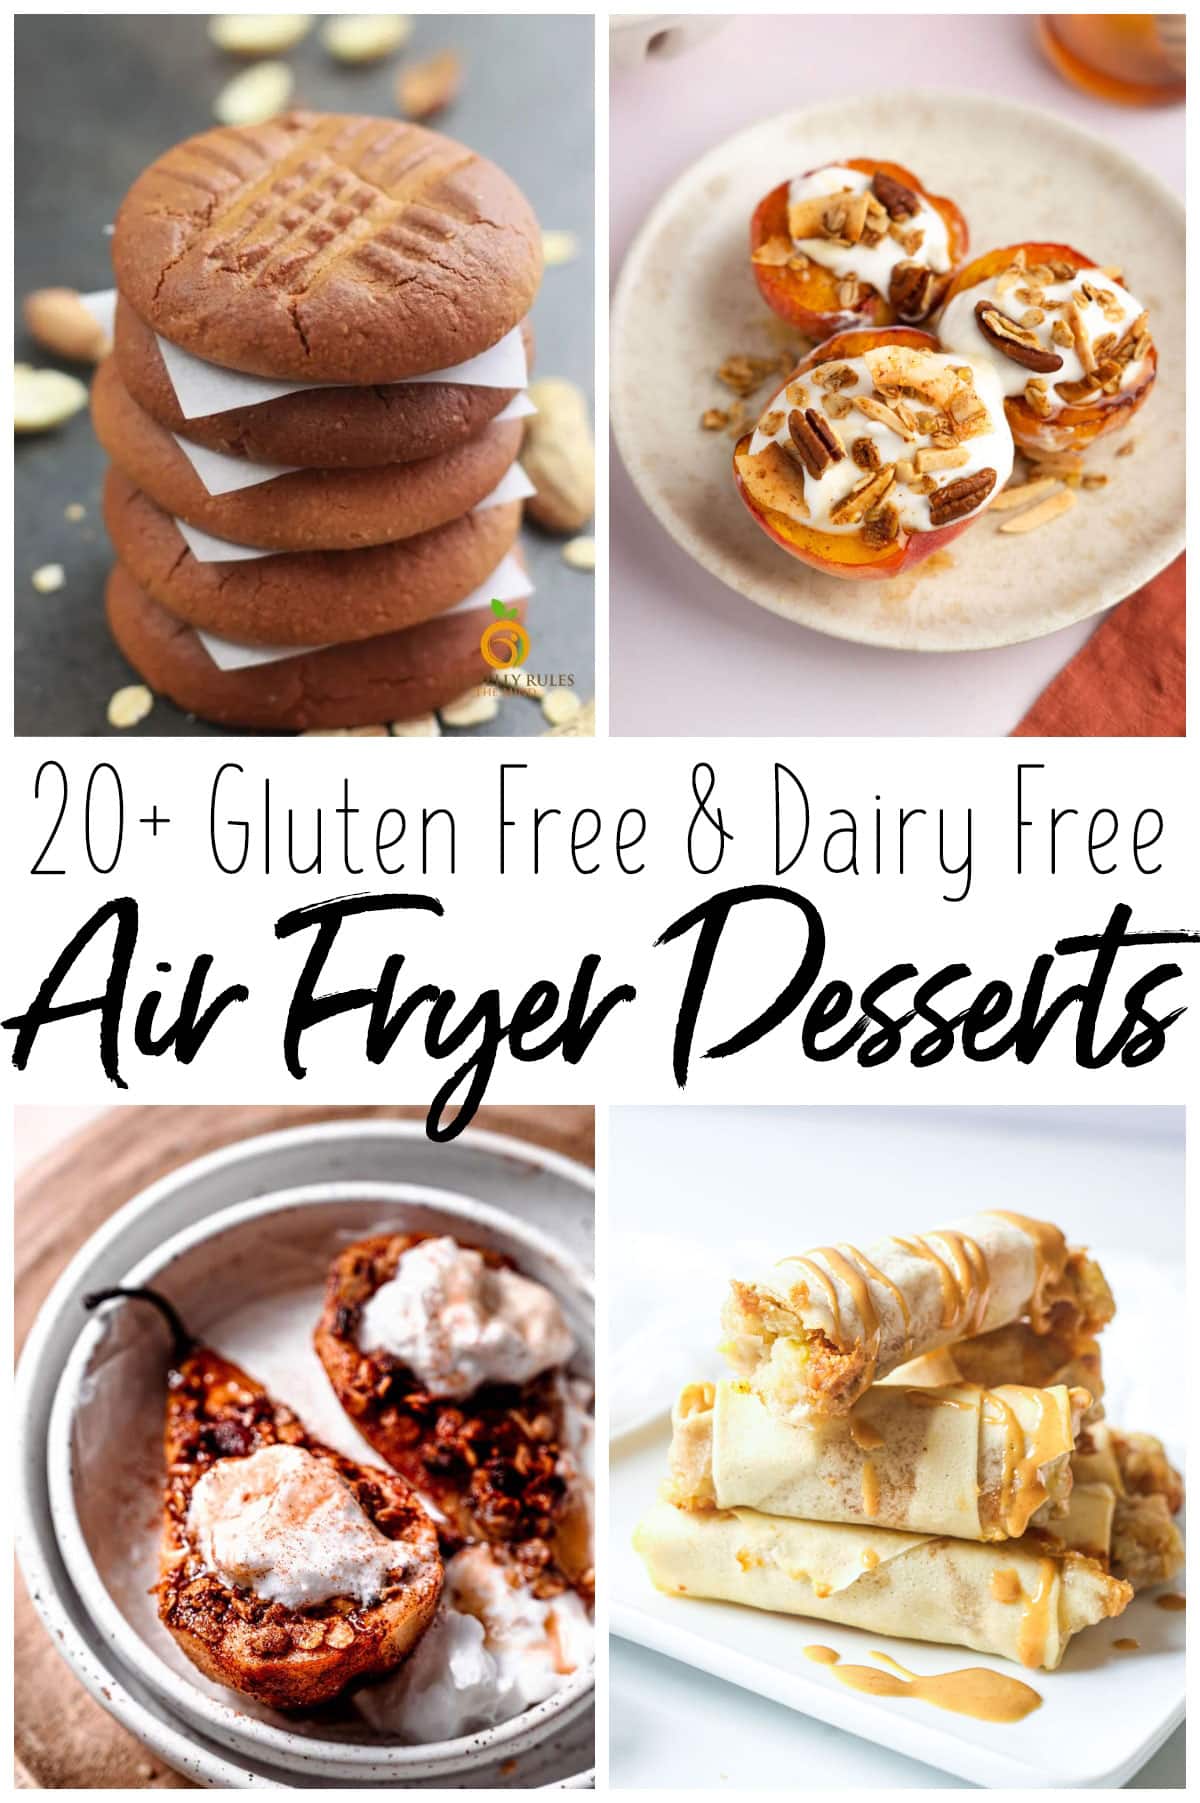 photo collage showing 4 different gluten free and dairy free air fryer desserts.